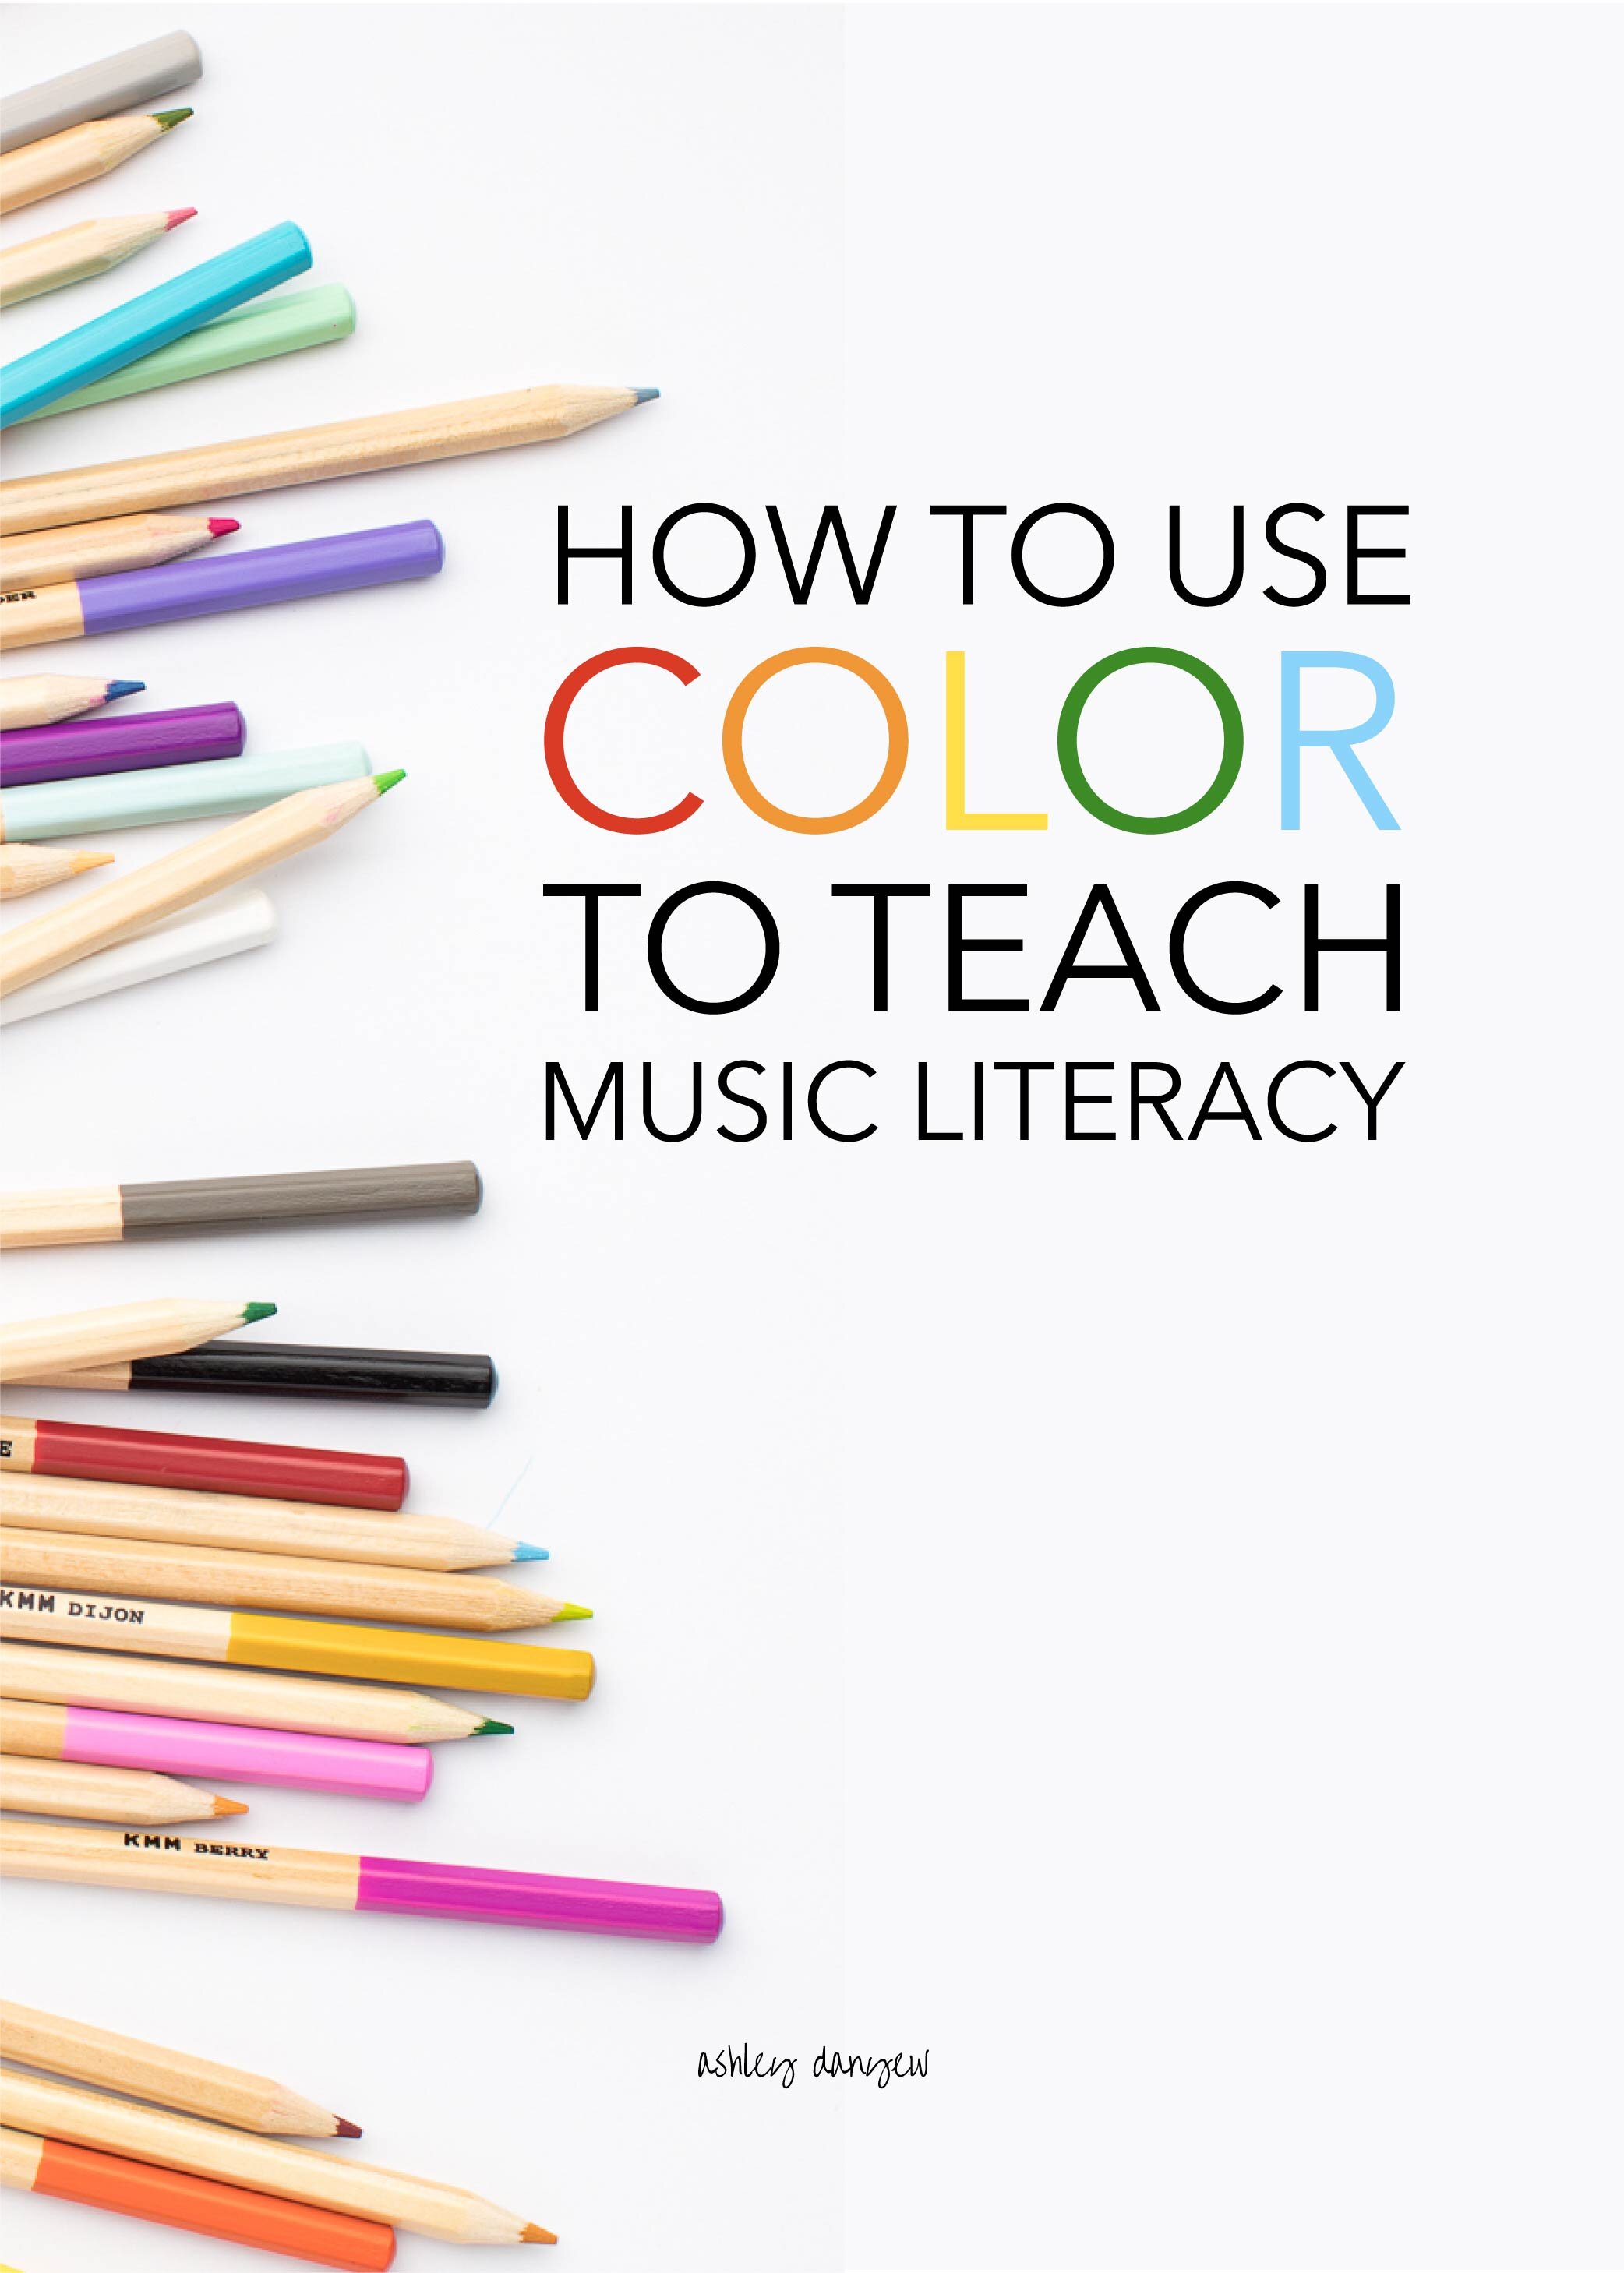 How to Use Color to Teach Music Literacy